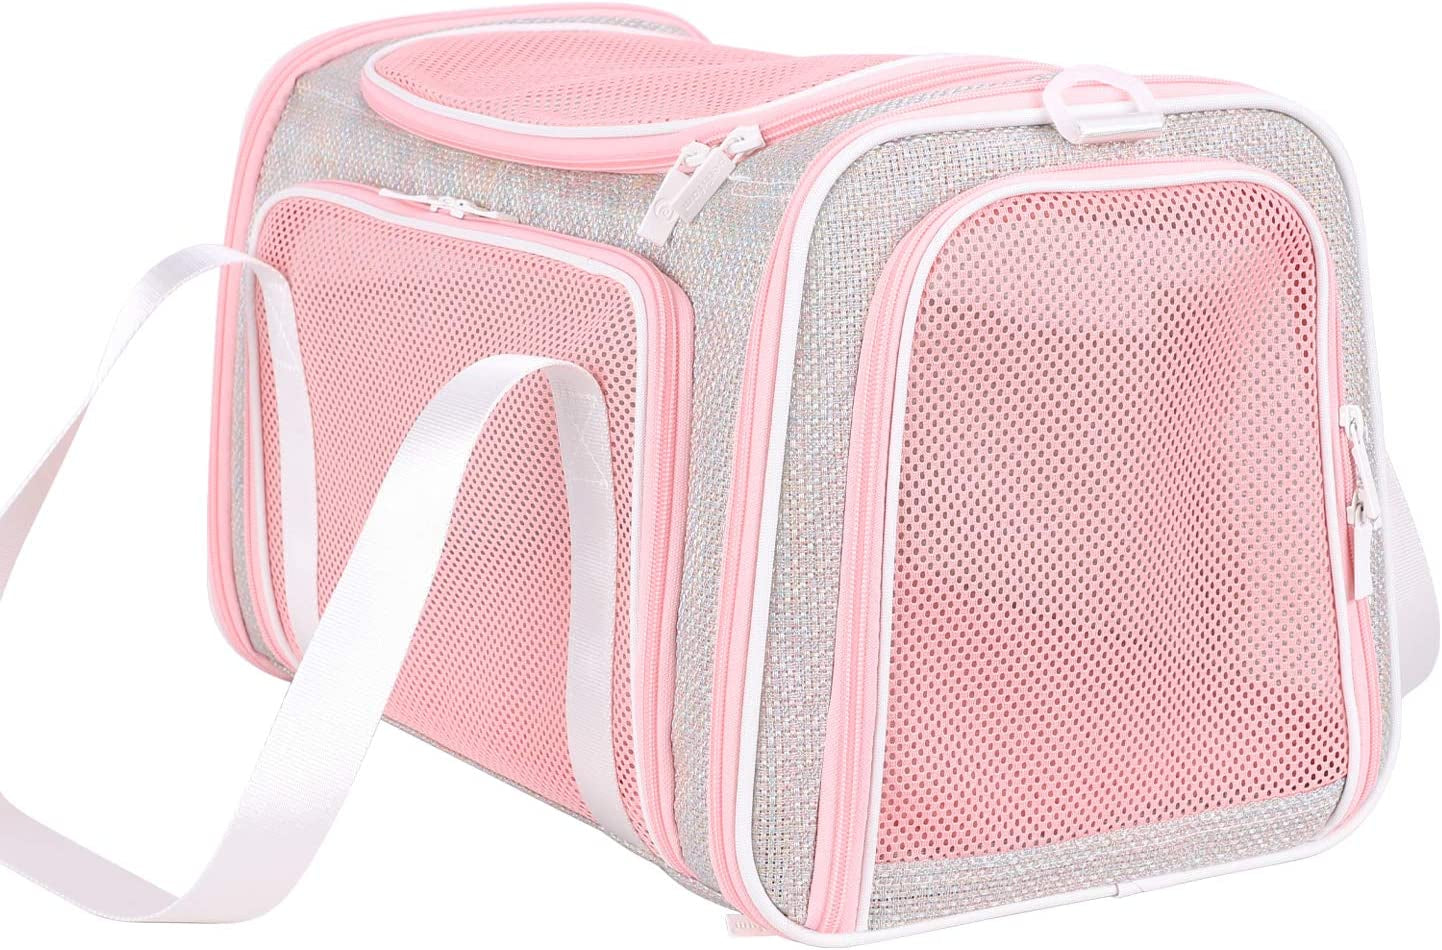 Soft Cute Travel Pet Carrier Bag for Medium Cats, Kitty and Puppy, Fantasy Pink, M